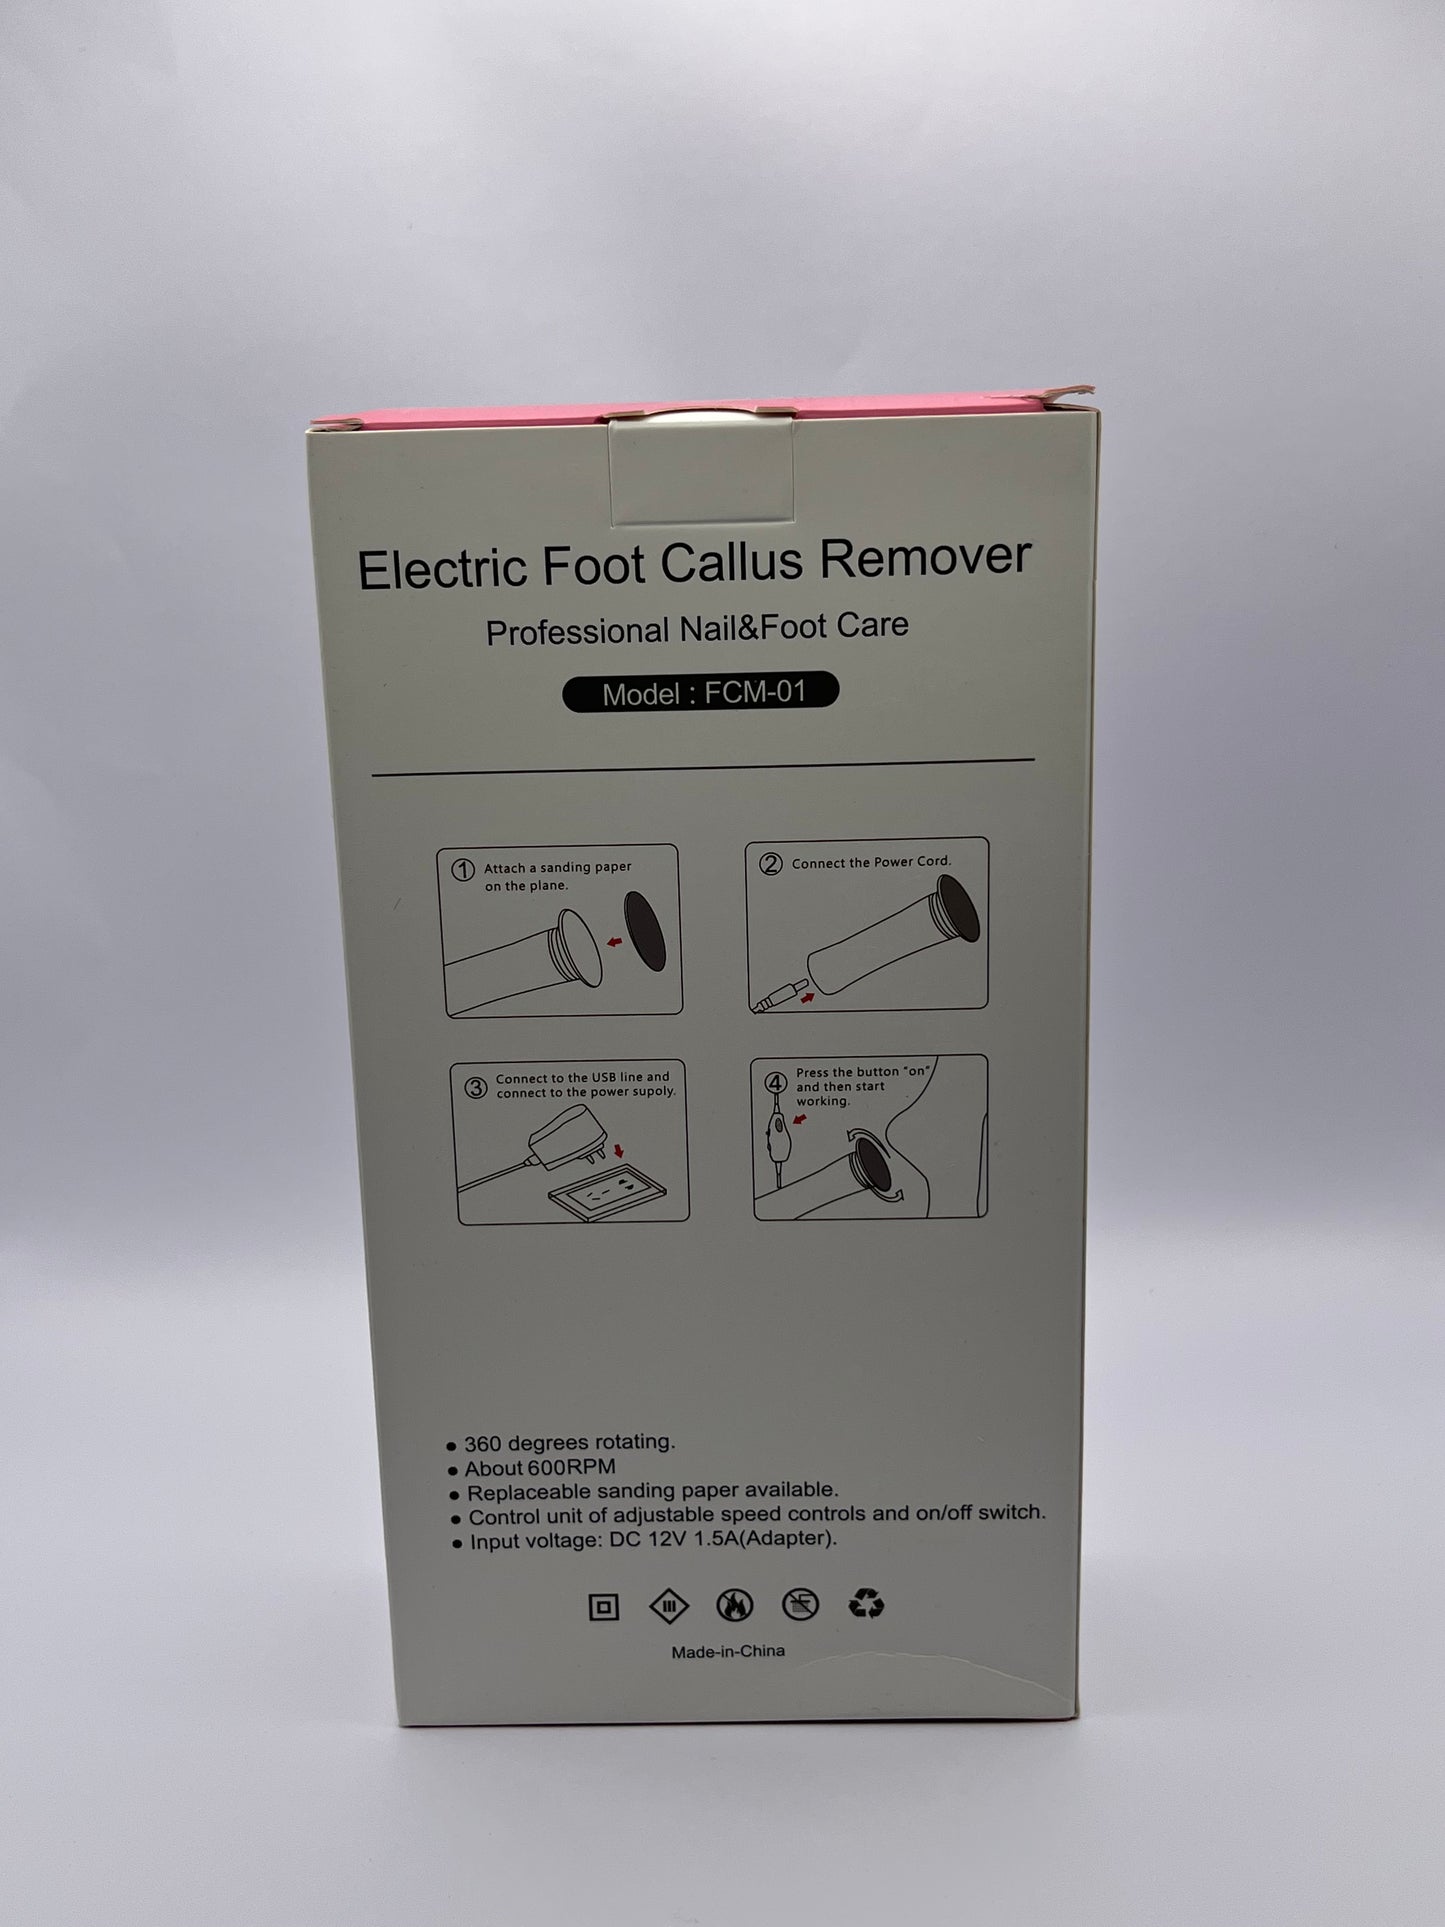 Electric Foot Callus Remover, Replacement sanding paper included